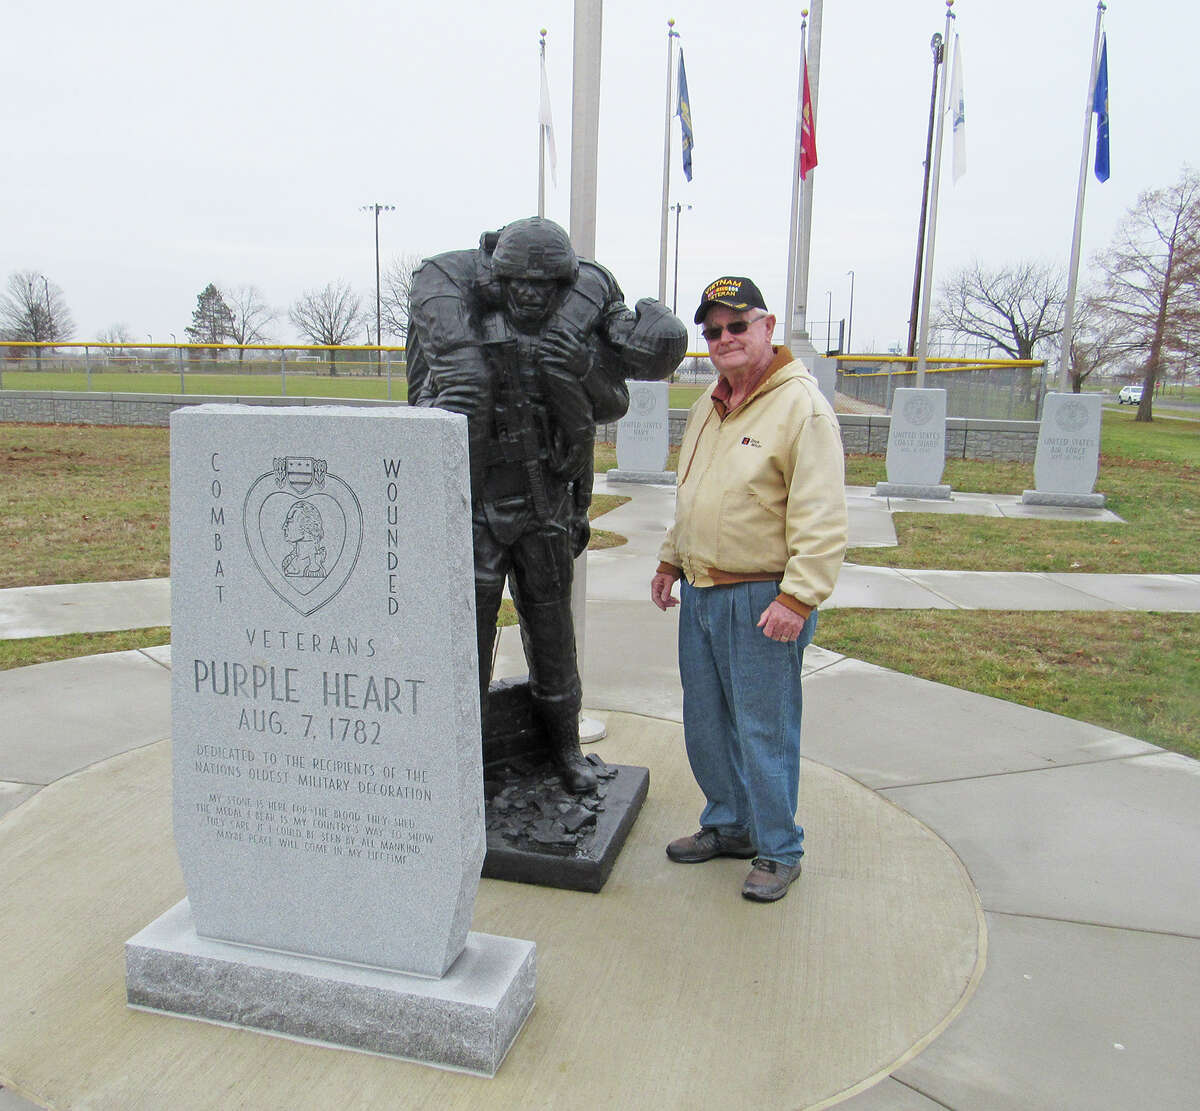 Tim Greenfield at the Purple Heart stone and statue, which is part of the new field of Honor and Service at Tri-Township Park in Troy. Greenfield spearheaded the effort to design the veterans’ memorial, which was originally built in 1992.